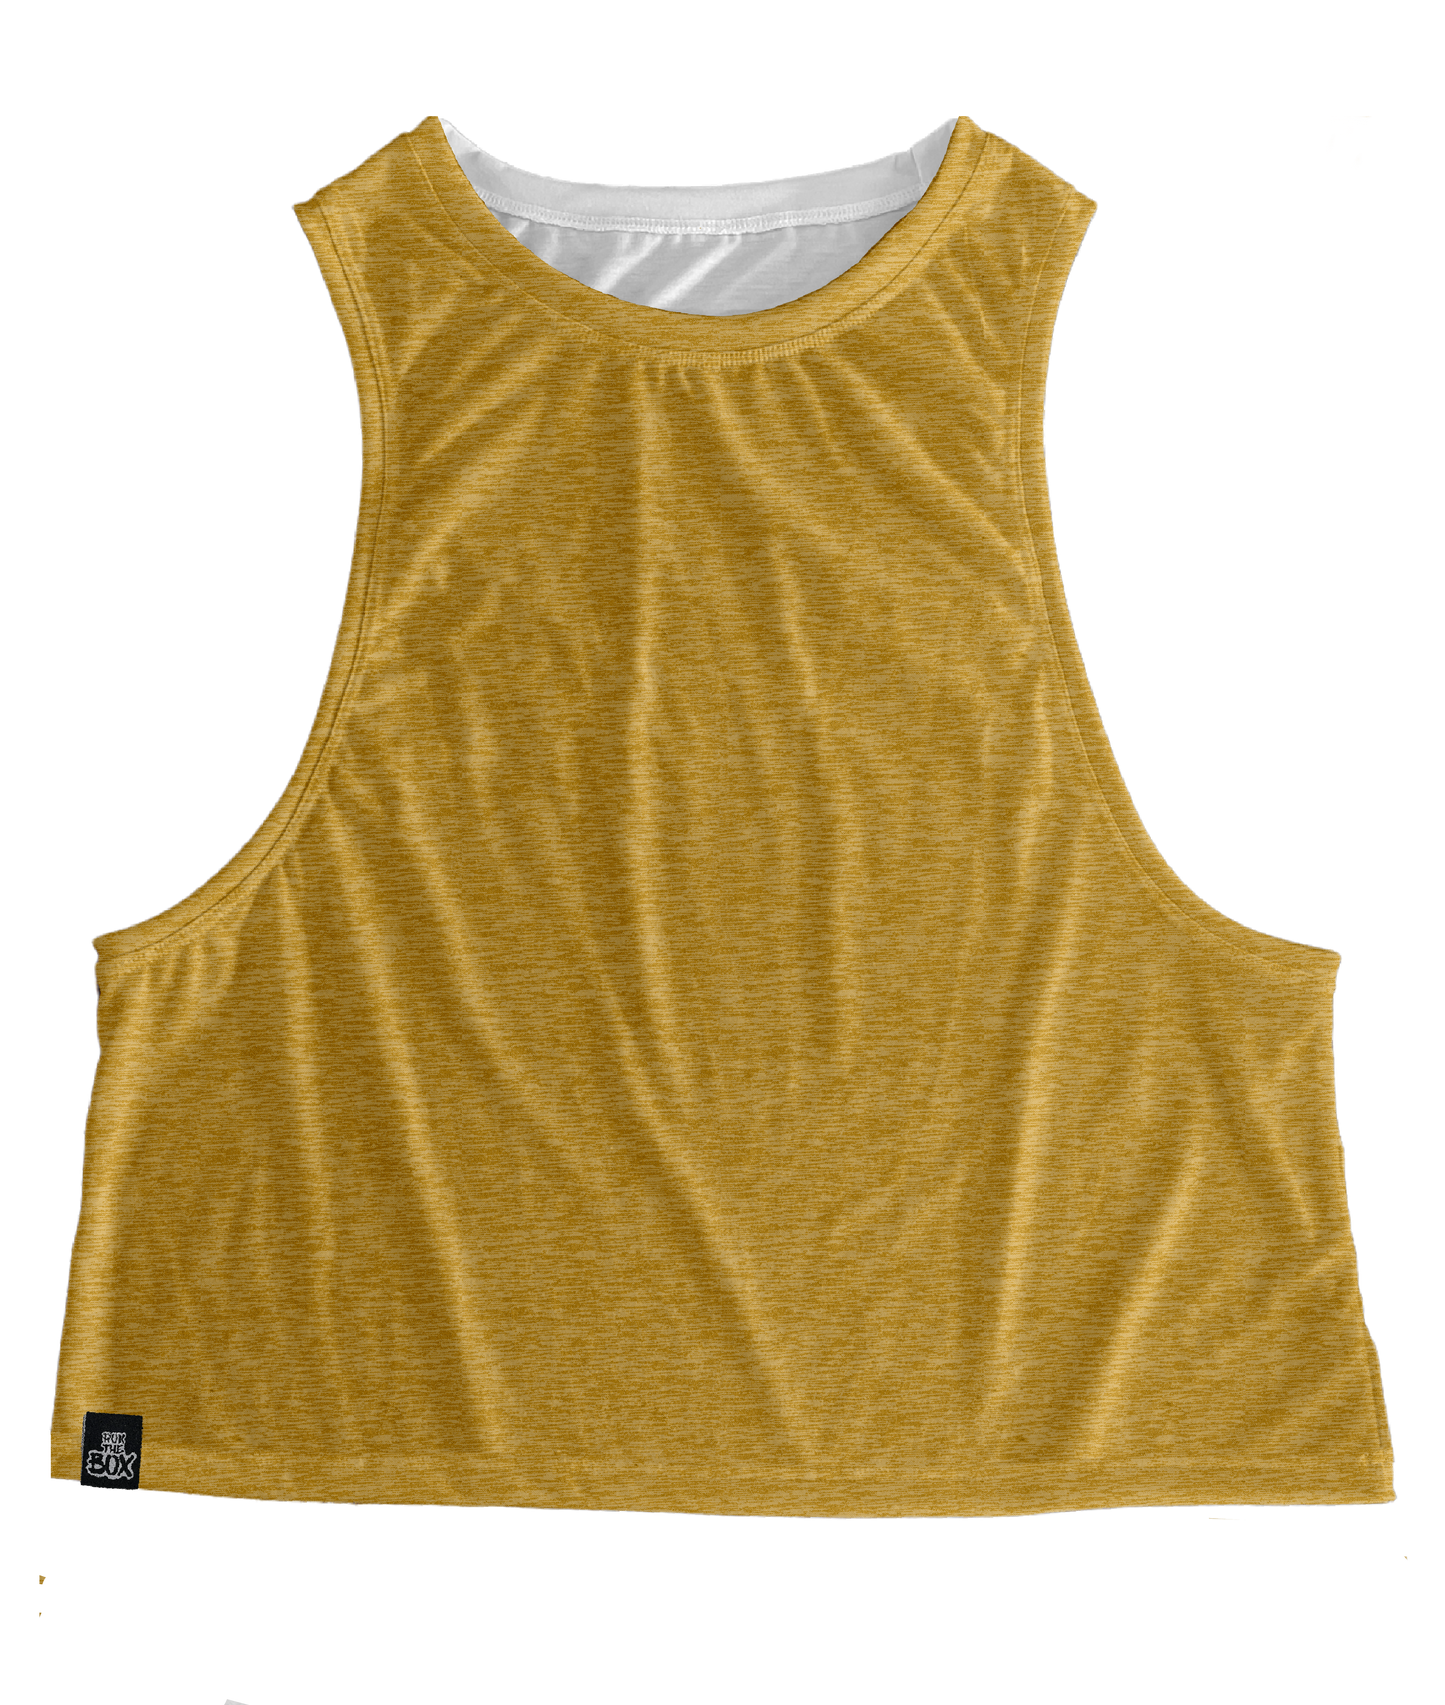 Gold Heathered Tops